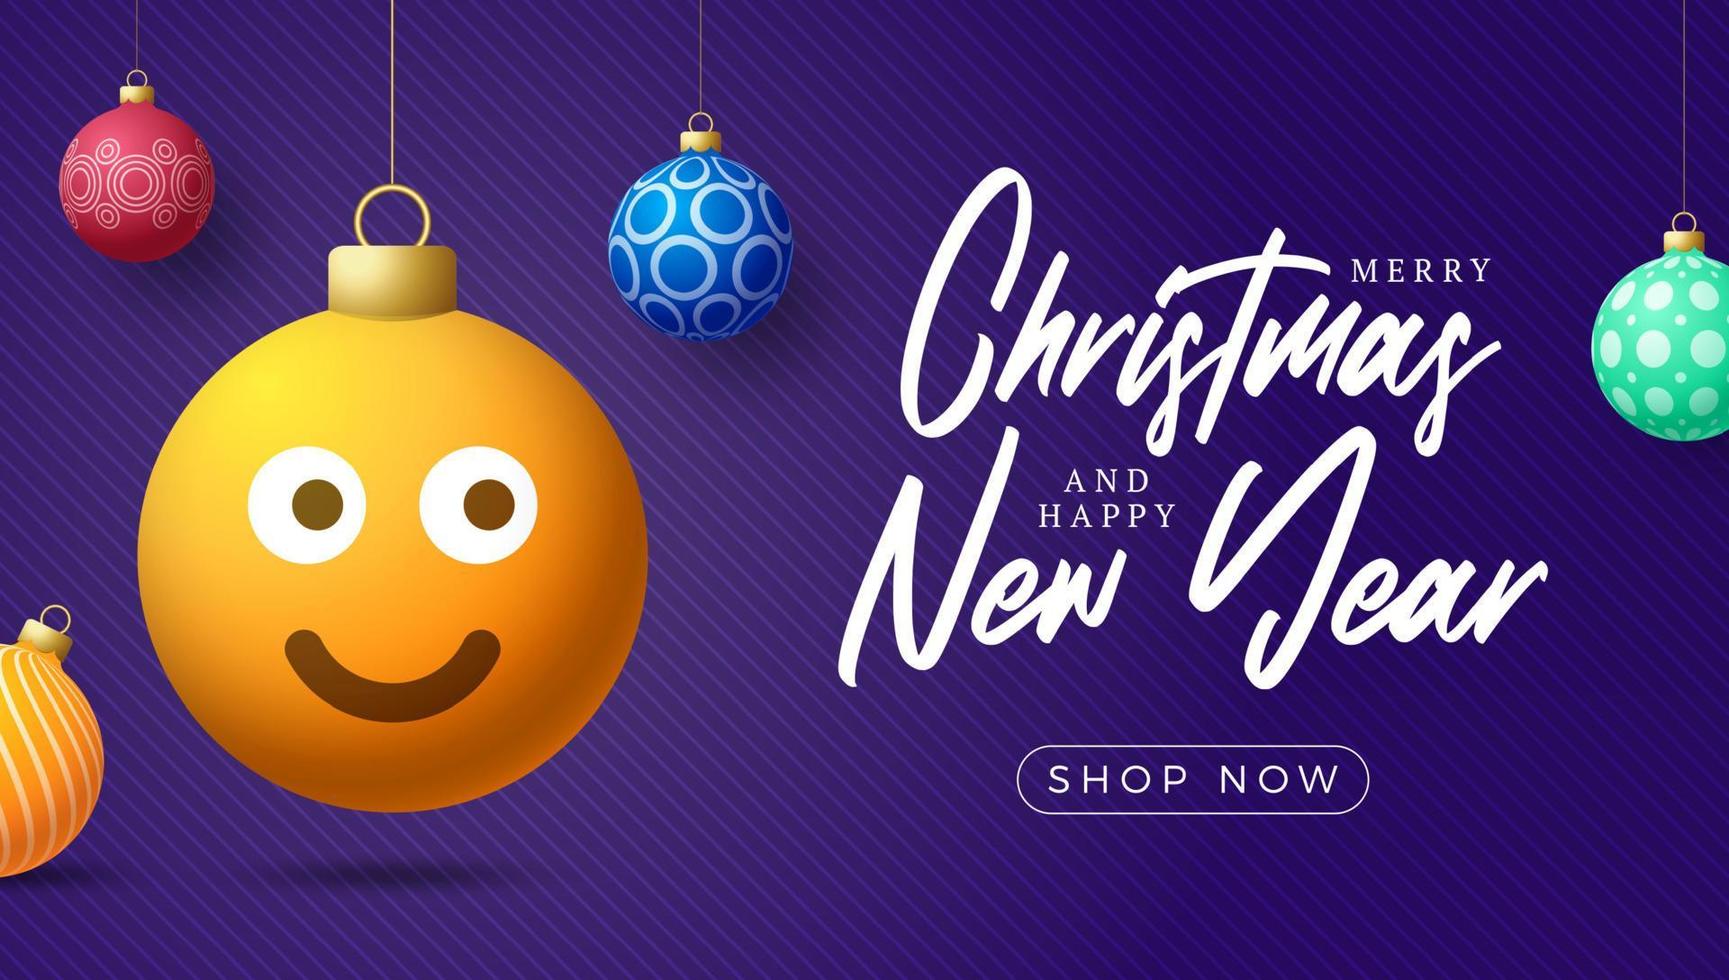 Merry Christmas card with smile emoji face. Vector illustration in flat style with Xmas lettering and emotion in christmas ball hang on thread on background